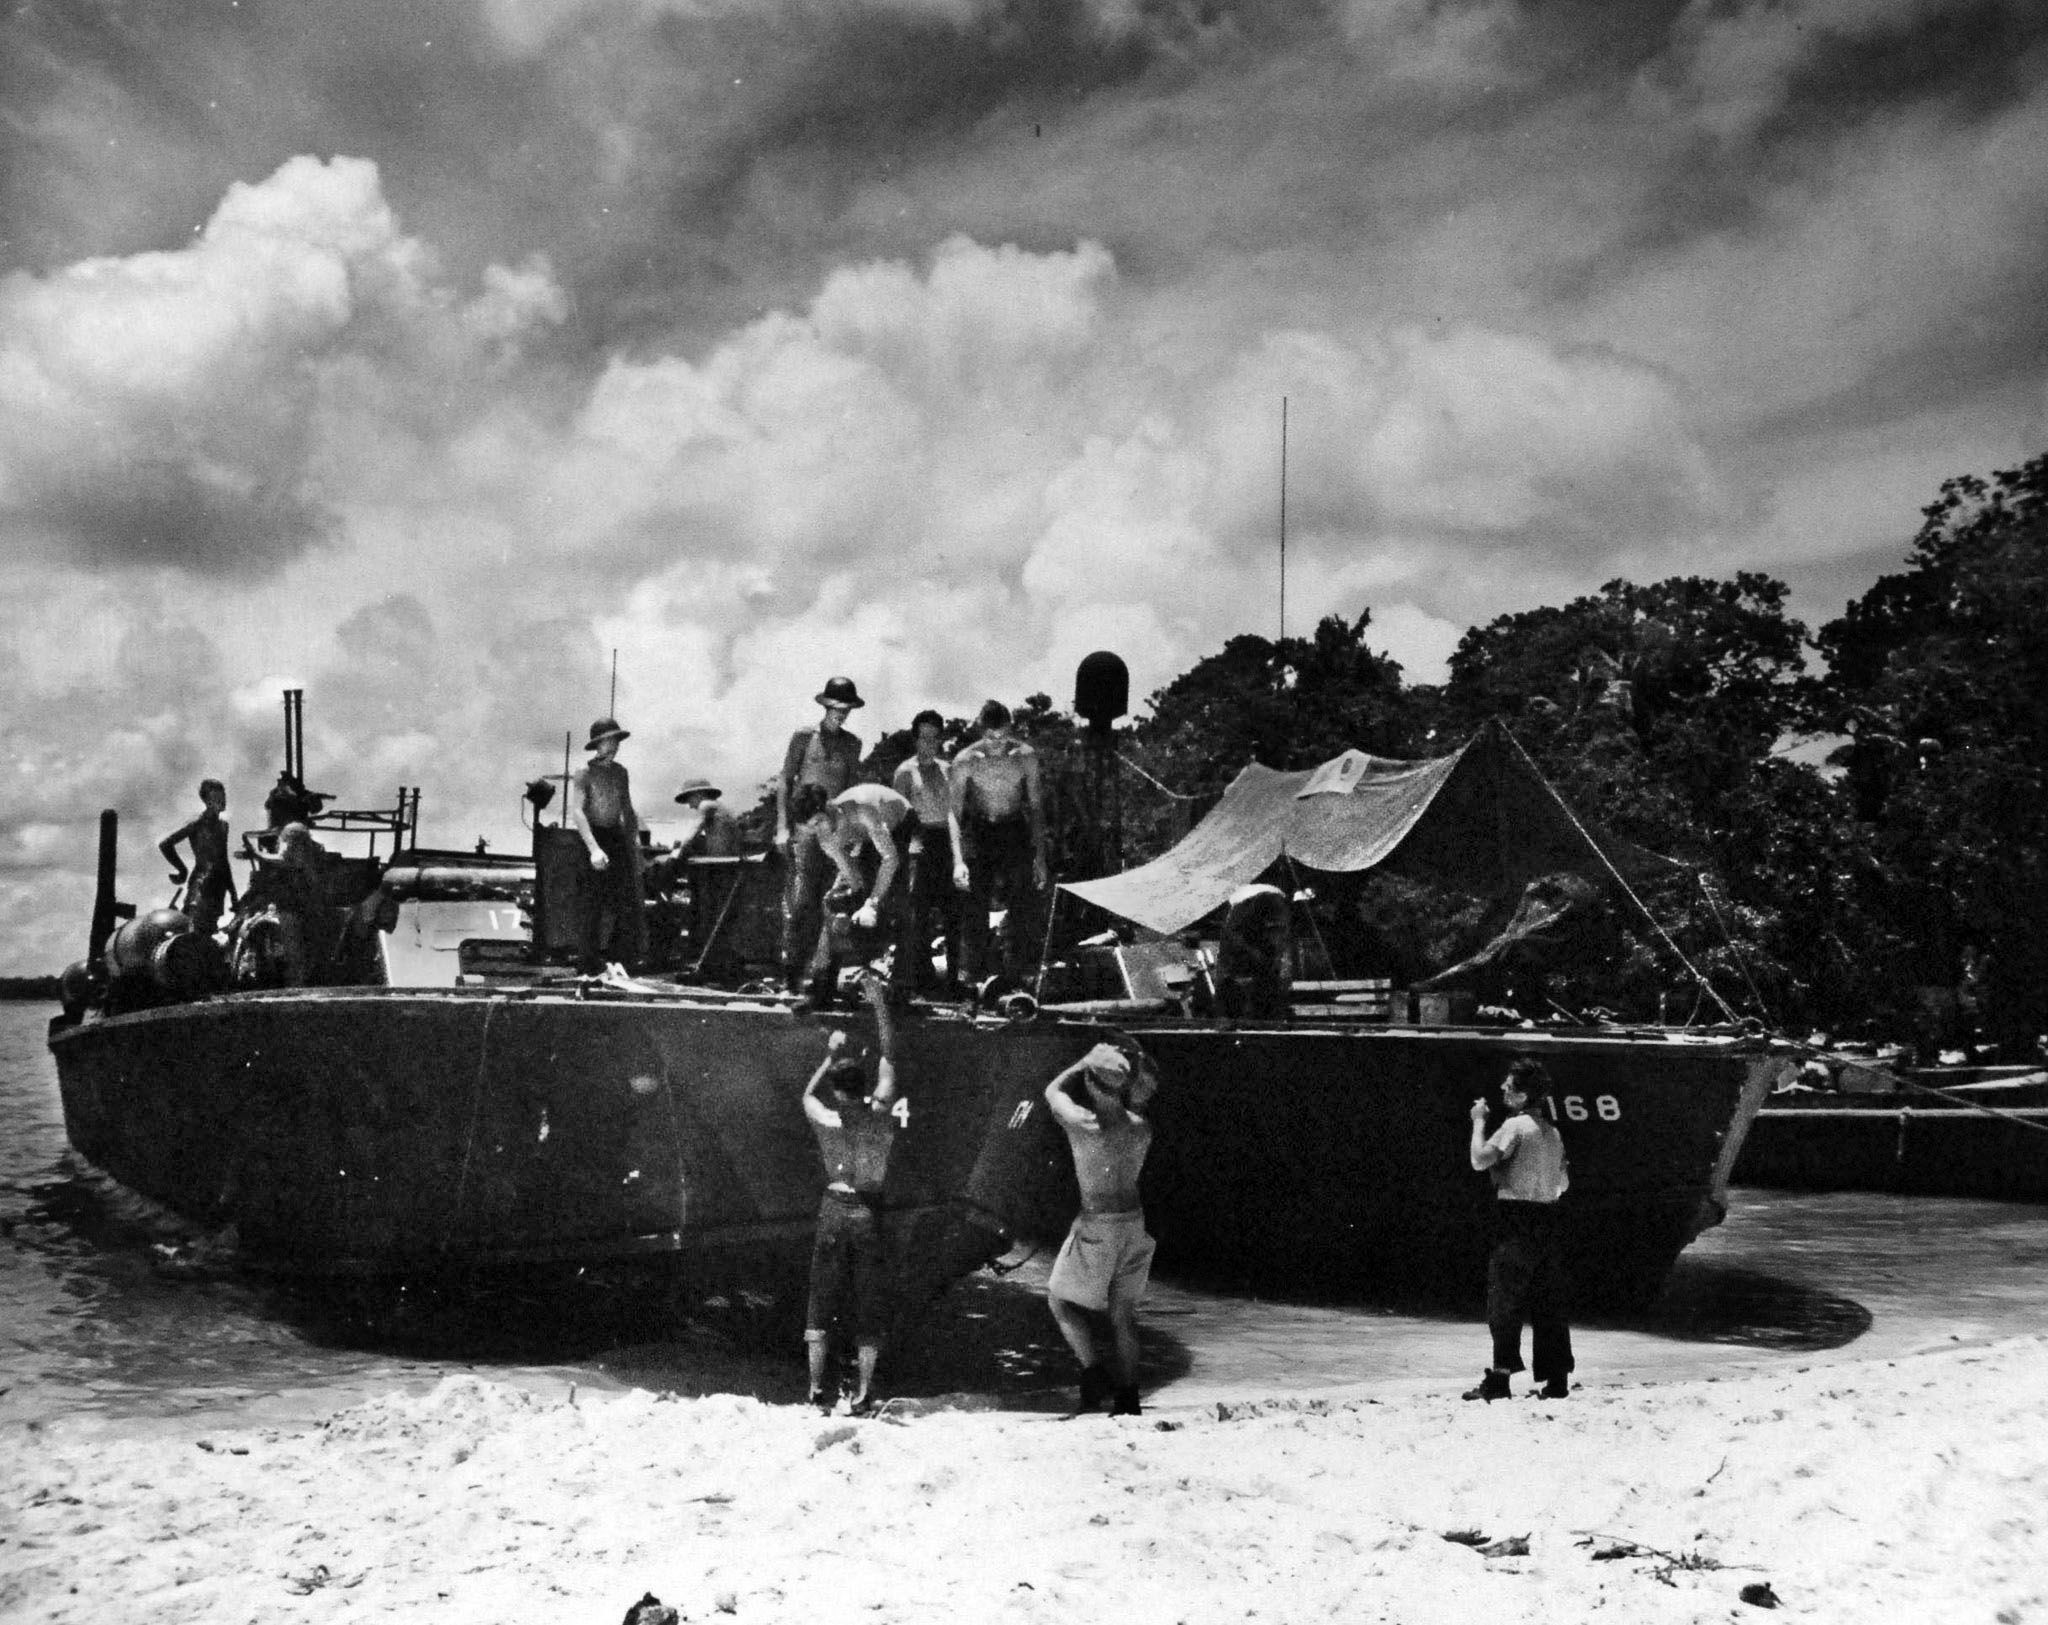 In this photo taken during World War II in the South Pacific, PT-168 is replenished with ammunition and supplies by members of her crew. A tarpaulin has been stretched across the deck aft to provide other crewmen with some relief from the tropical sun.